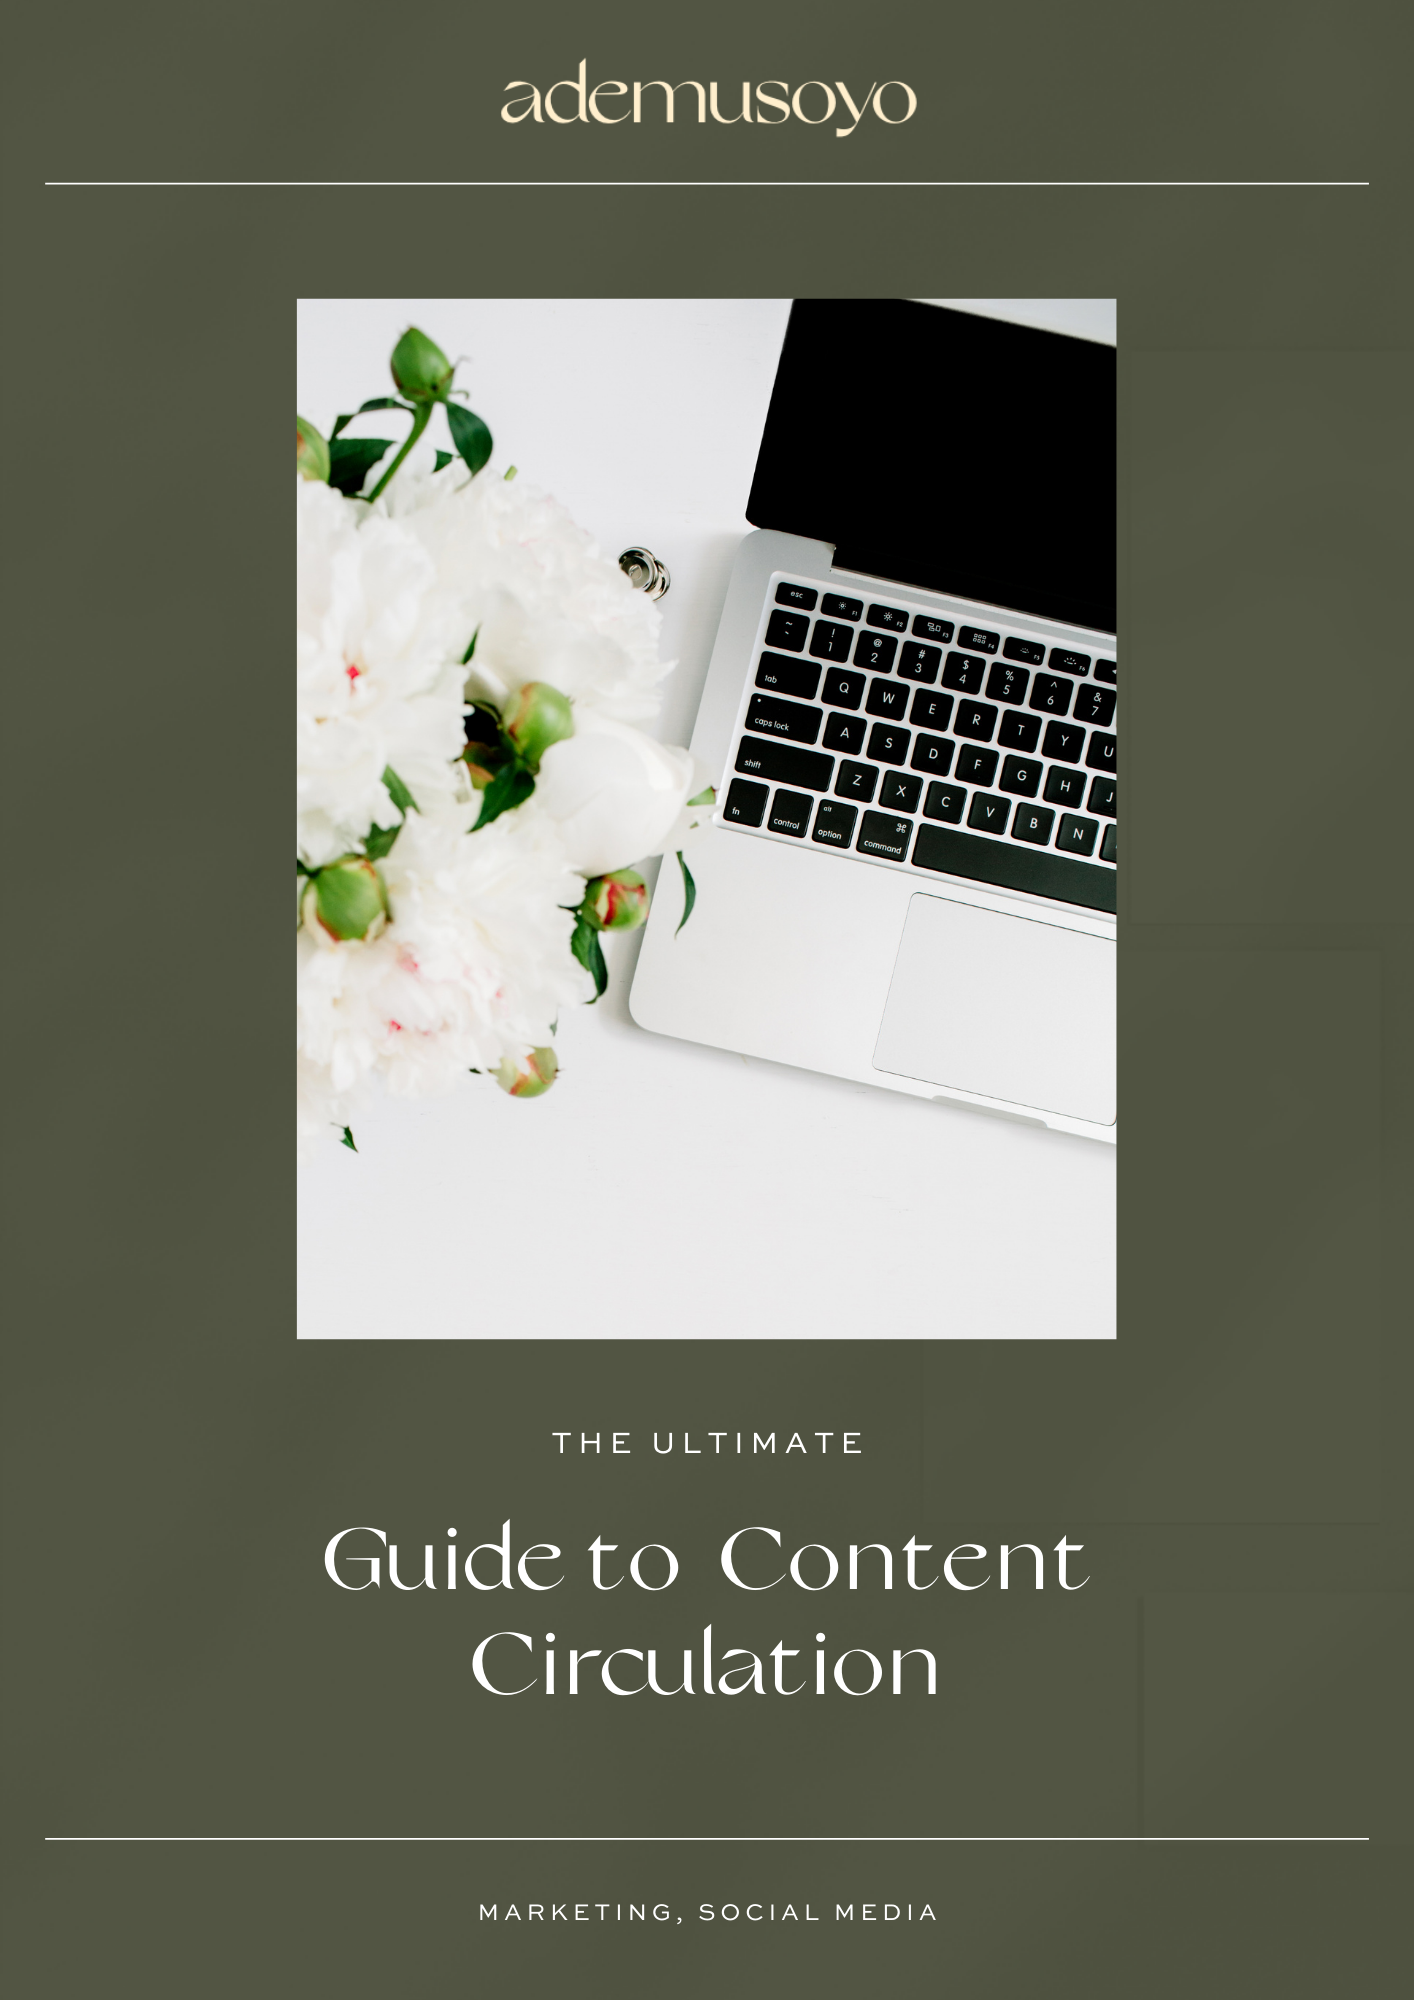 The Ultimate Guide to Content Circulation